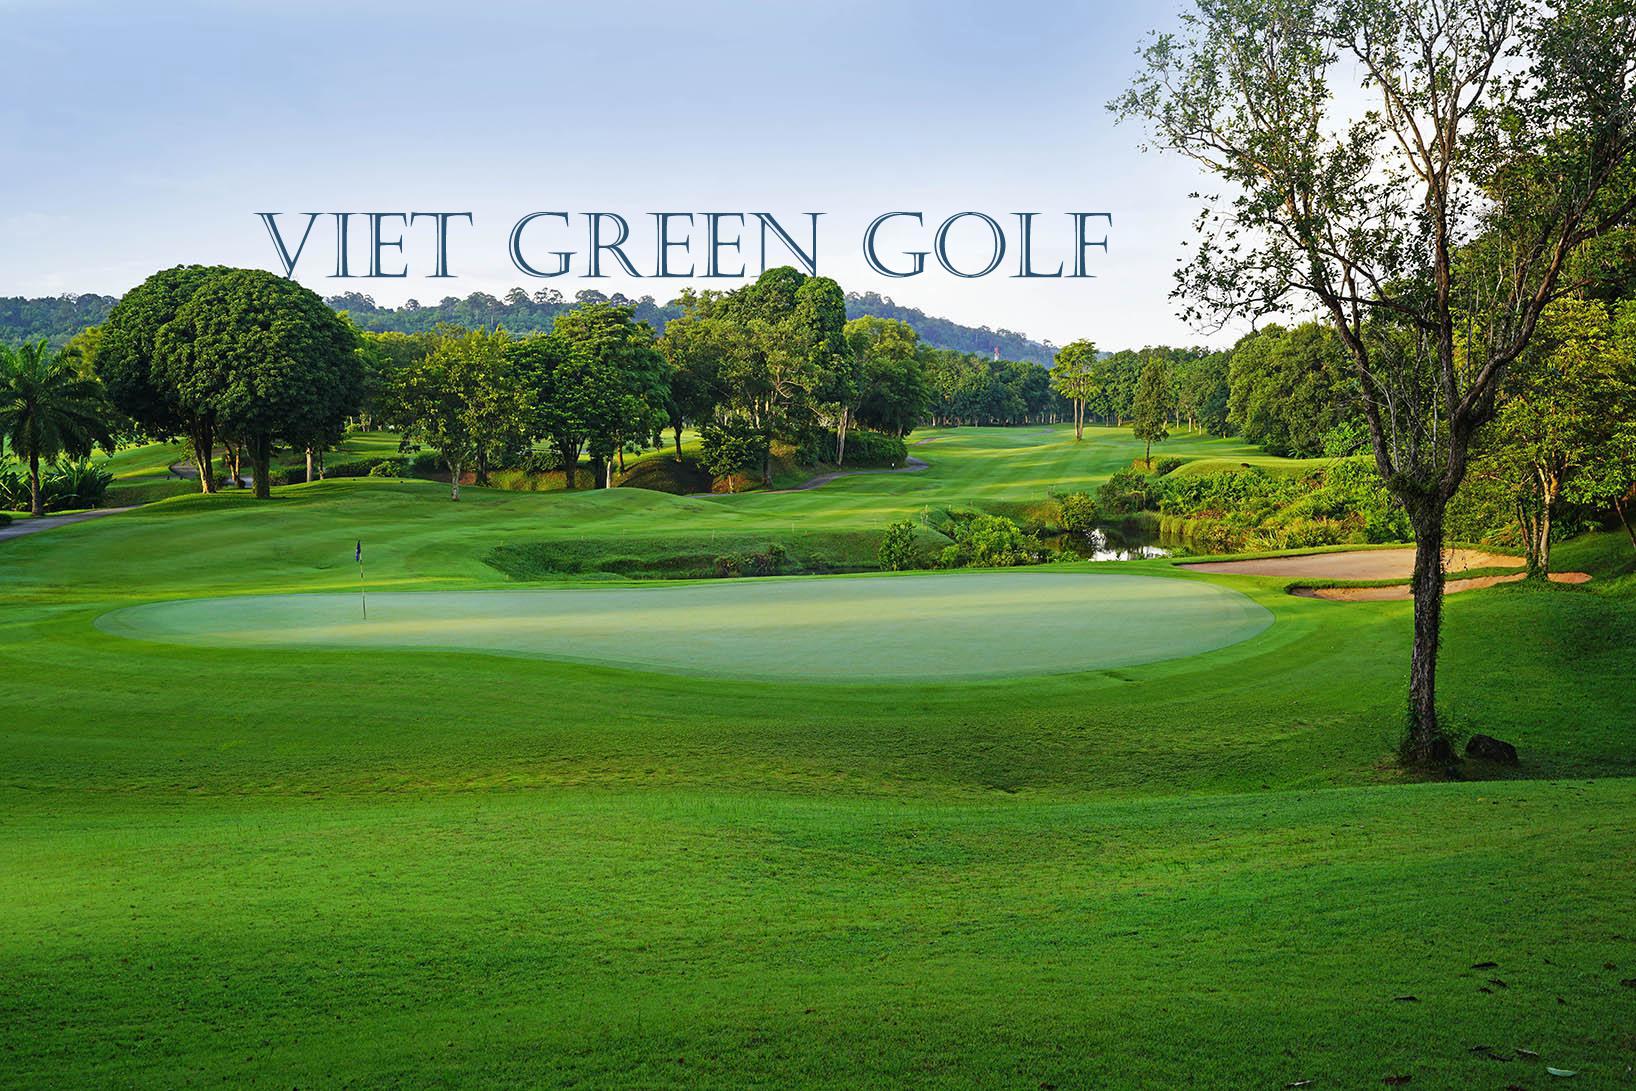 Thailand golf destinations: Phuket - Samui Golf Holiday Package 7 days with 5 rounds